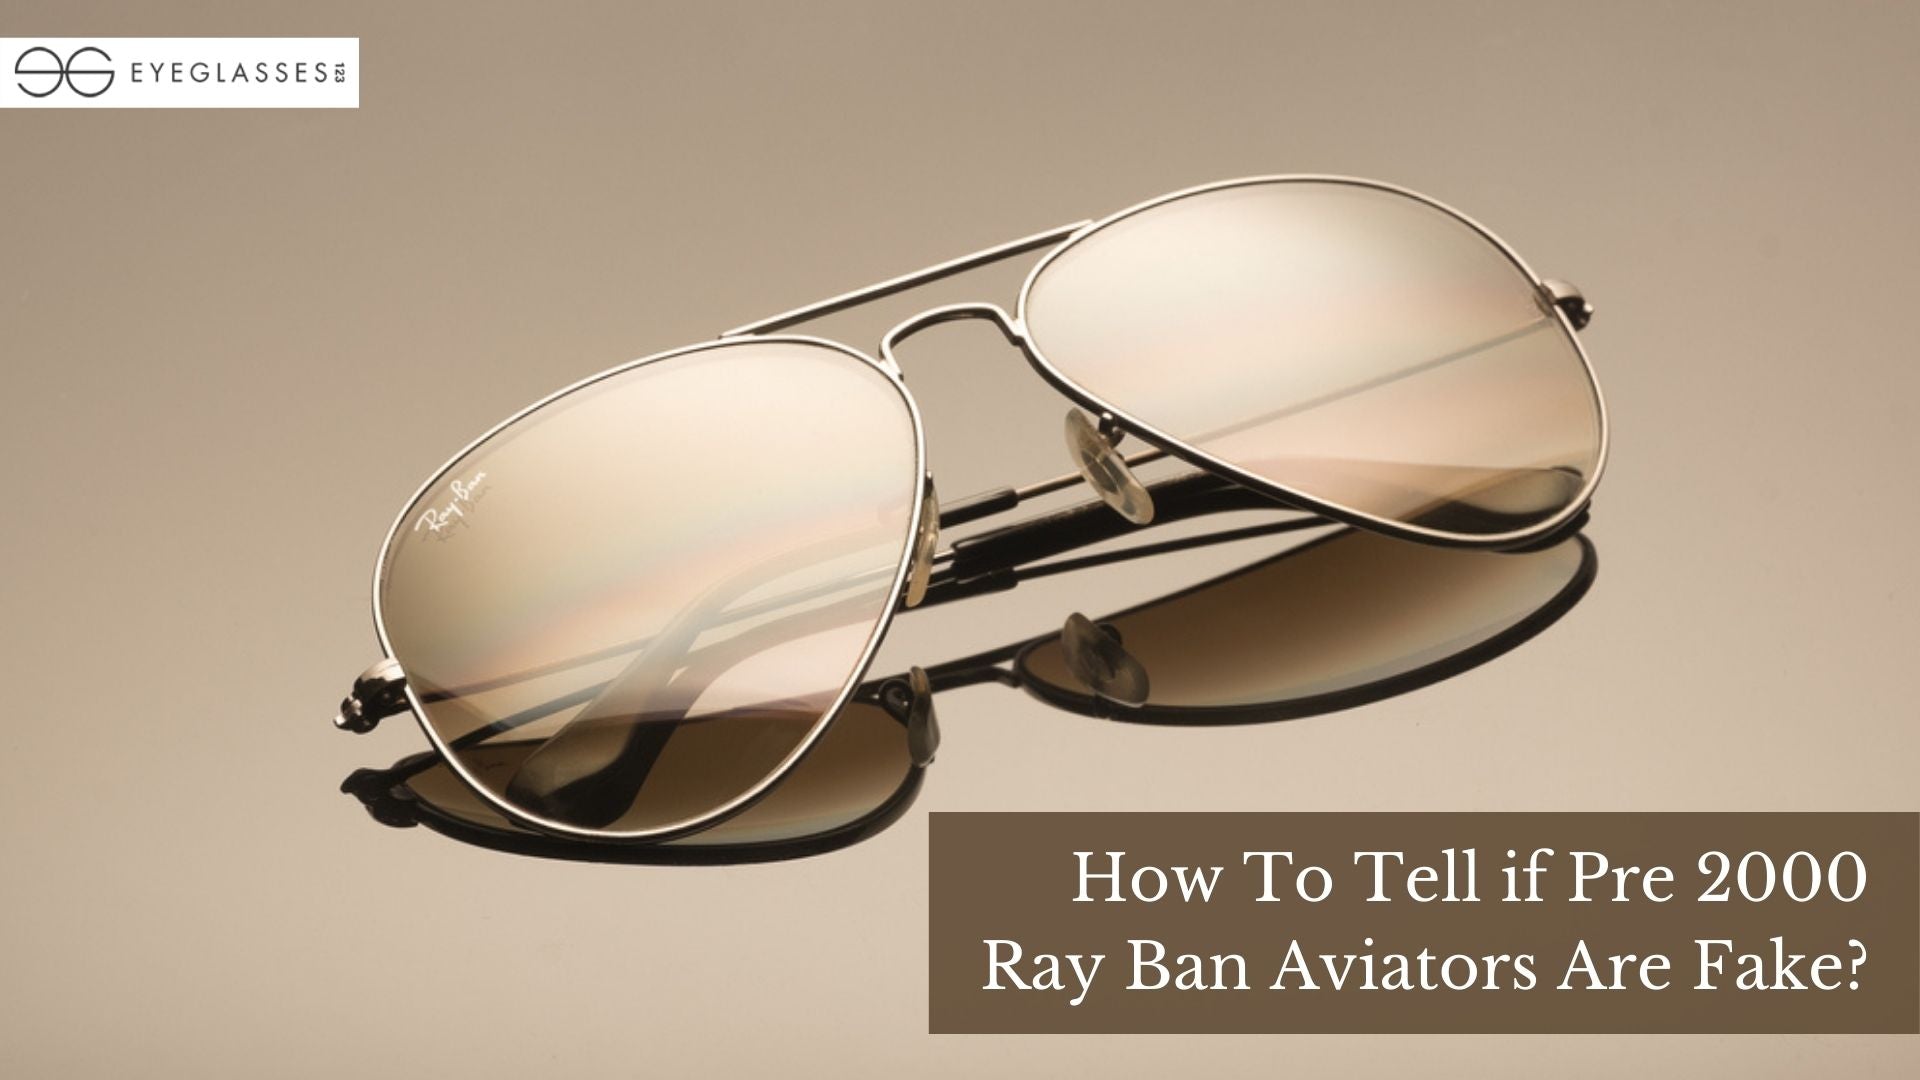 How To Tell If Pre 2000 Ray Ban Aviators Are Fake?